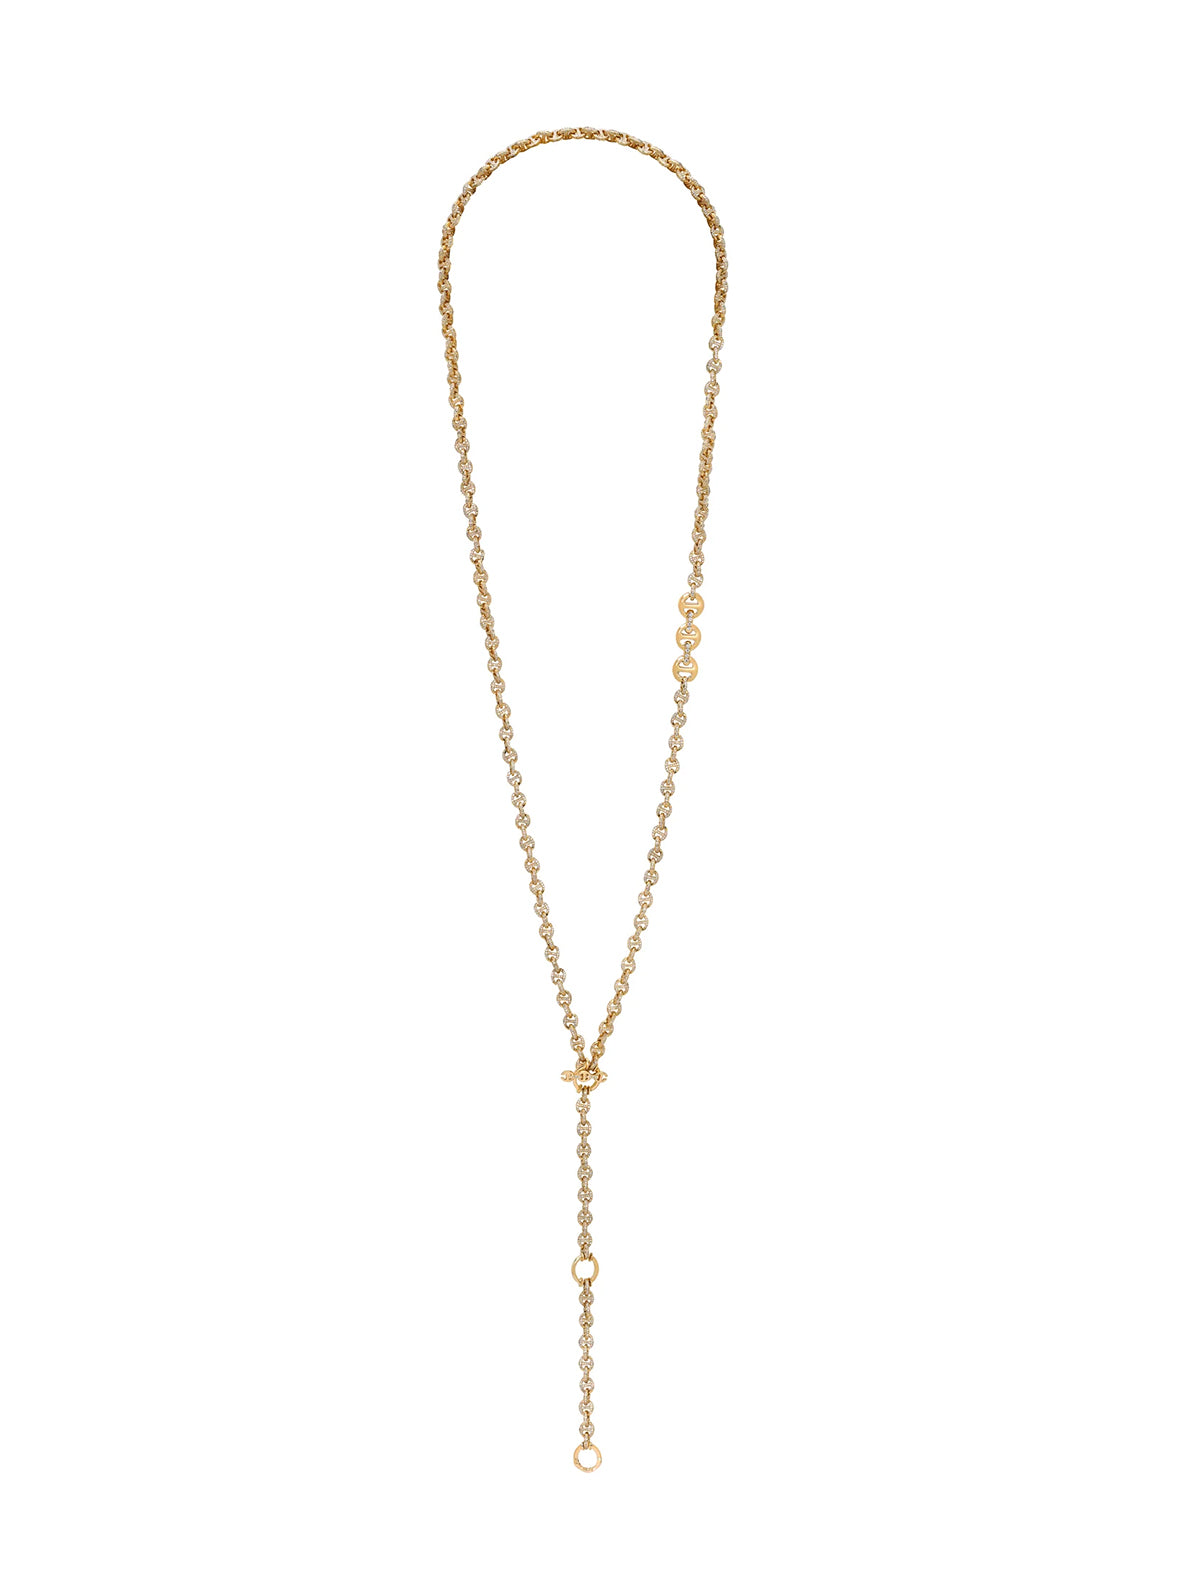 HOORSENBUHS 5mm Open-Link™ Necklace Antiquated 18k Yellow Gold